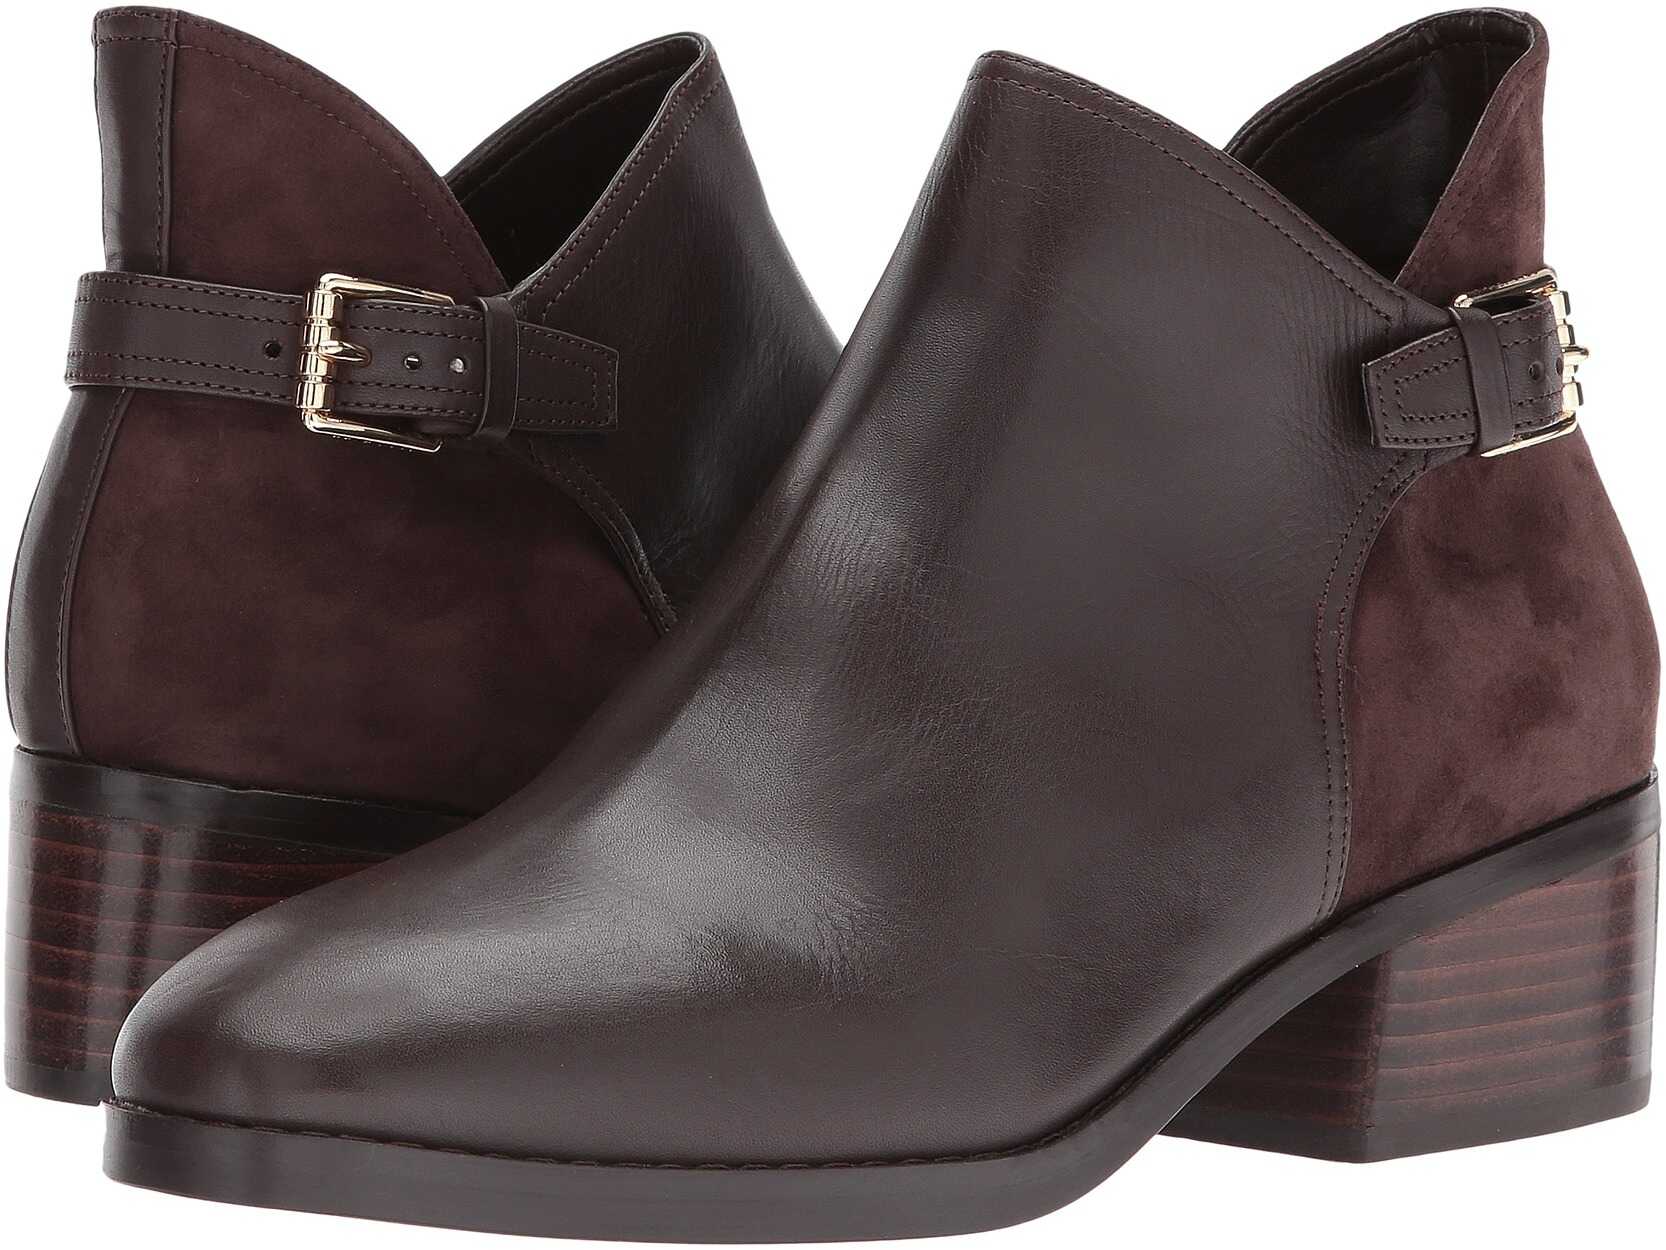 Cole Haan Althea Bootie Java Leather/Suede